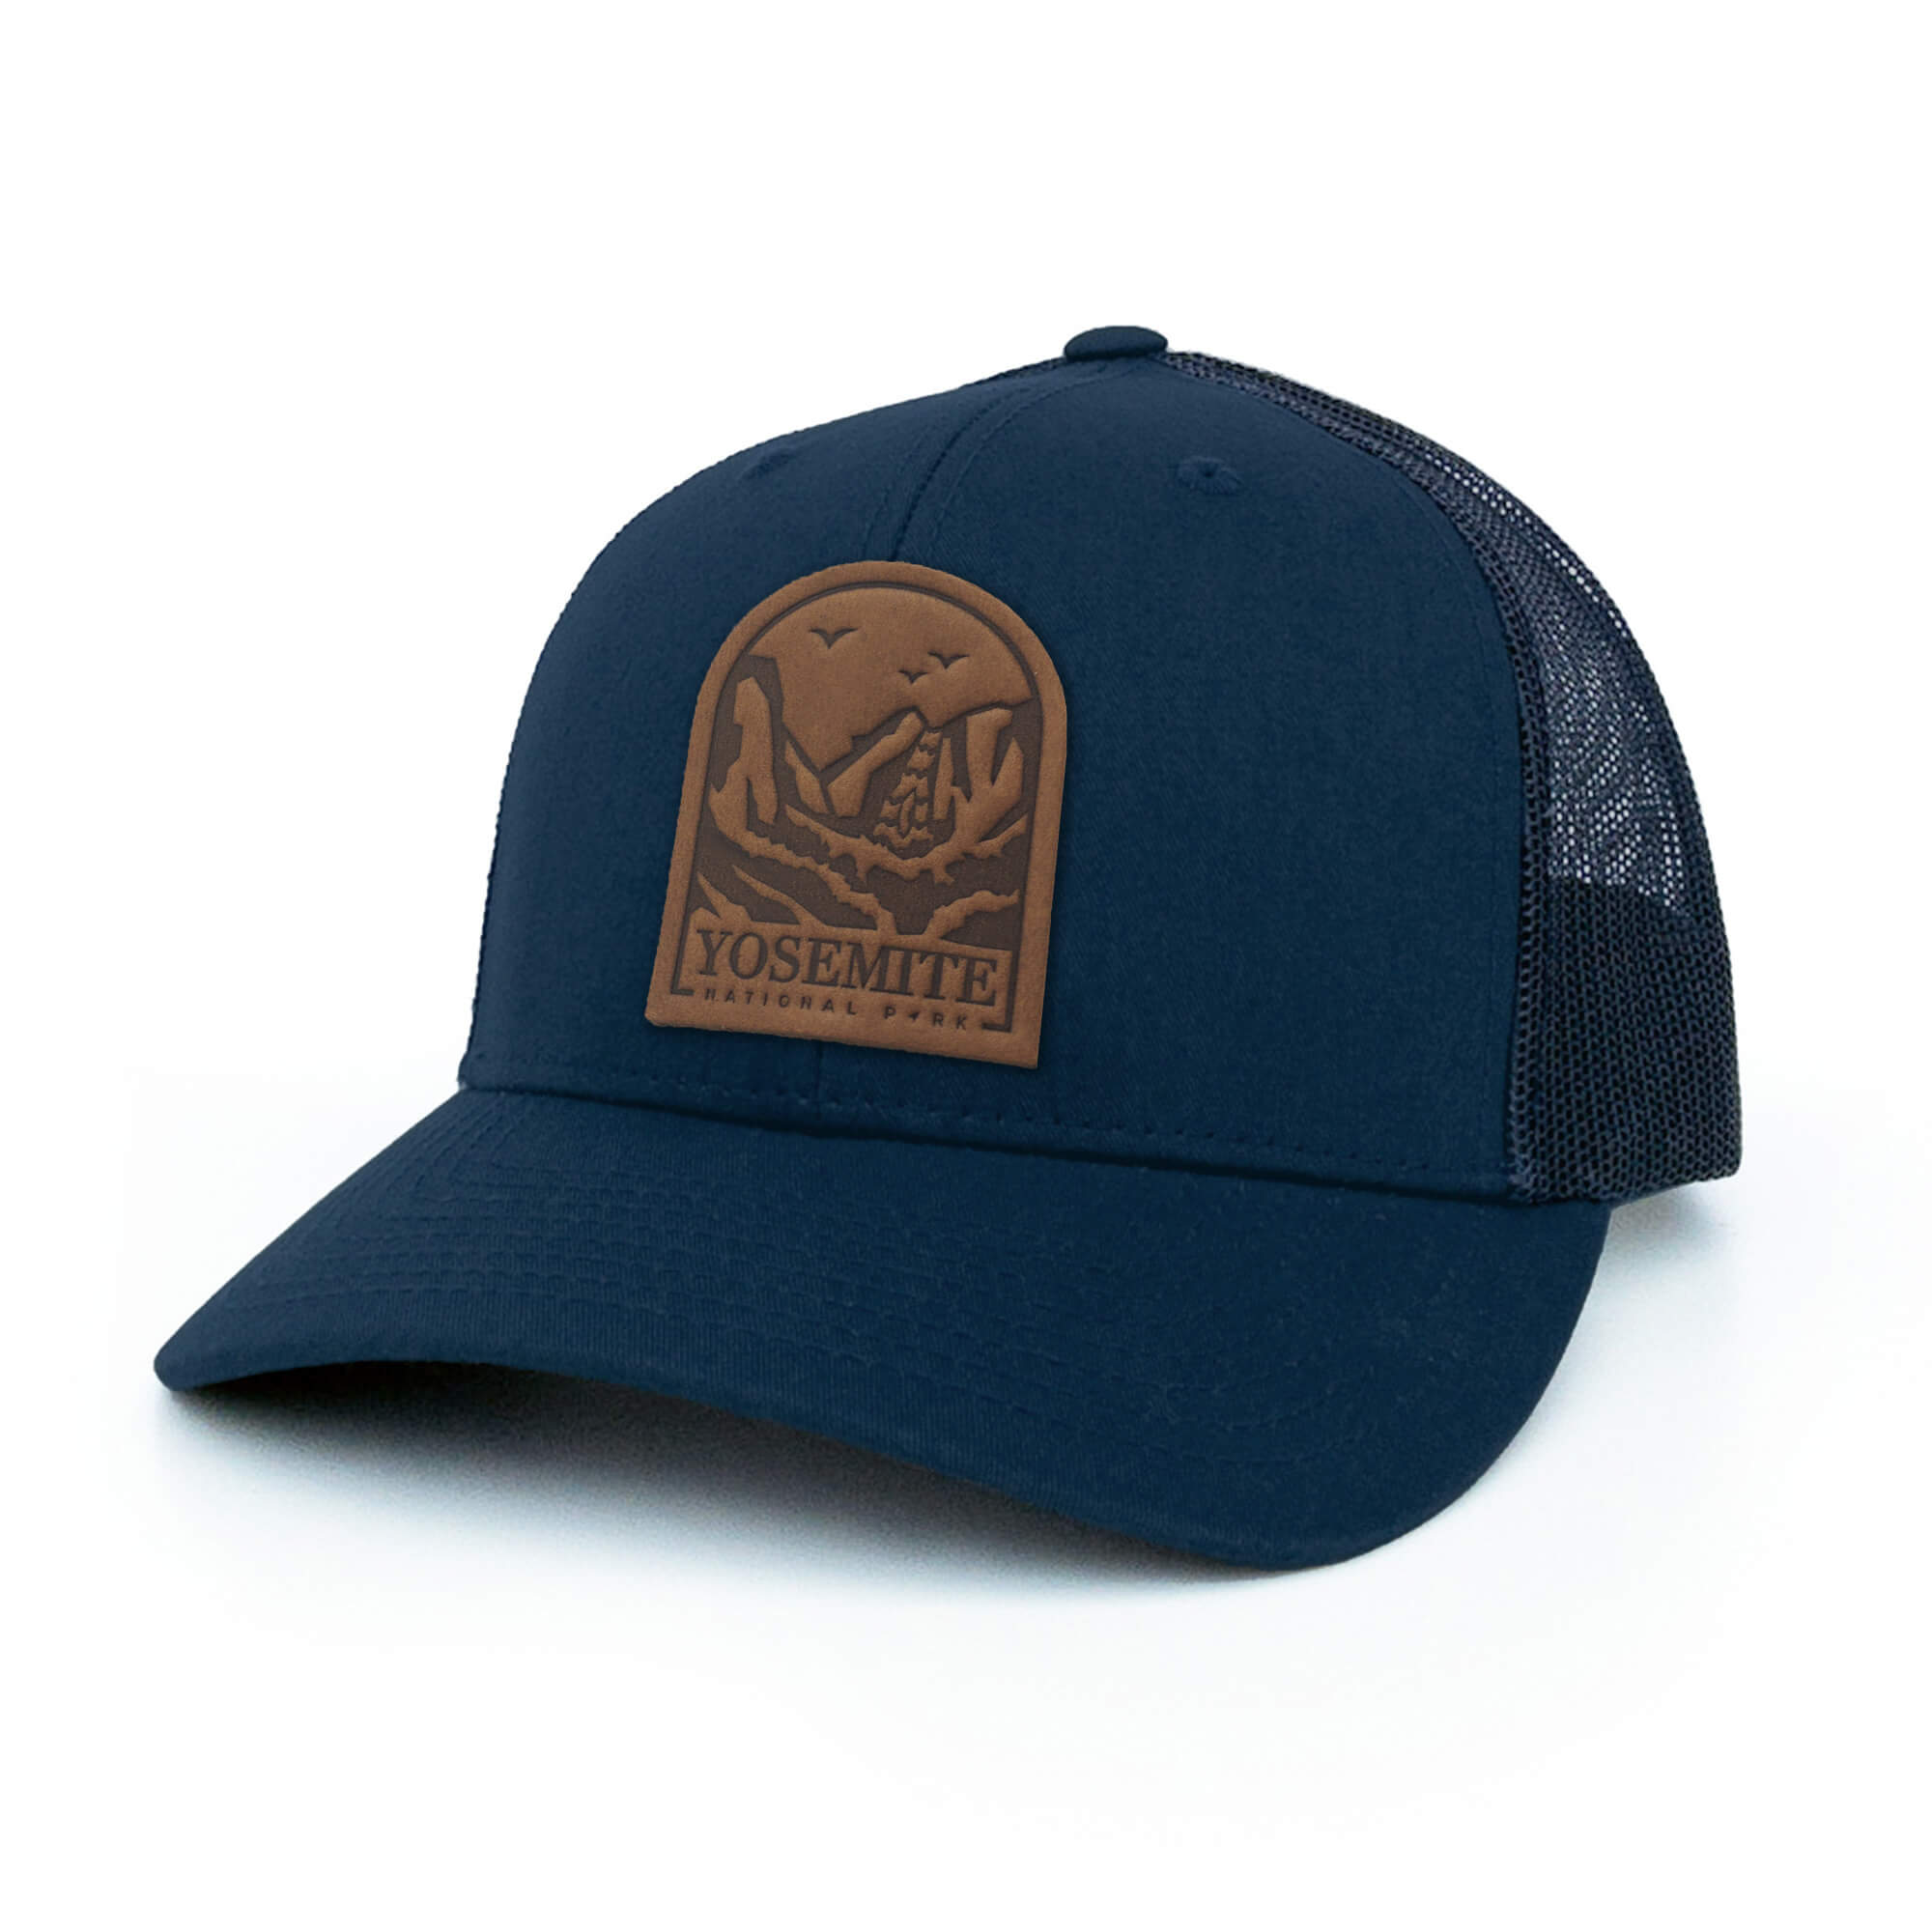 Navy trucker hat with full-grain leather patch of Yosemite National Park | BLACK-007-002, CHARC-007-002, NAVY-007-002, HGREY-007-002, MOSS-007-002, BROWN-007-002